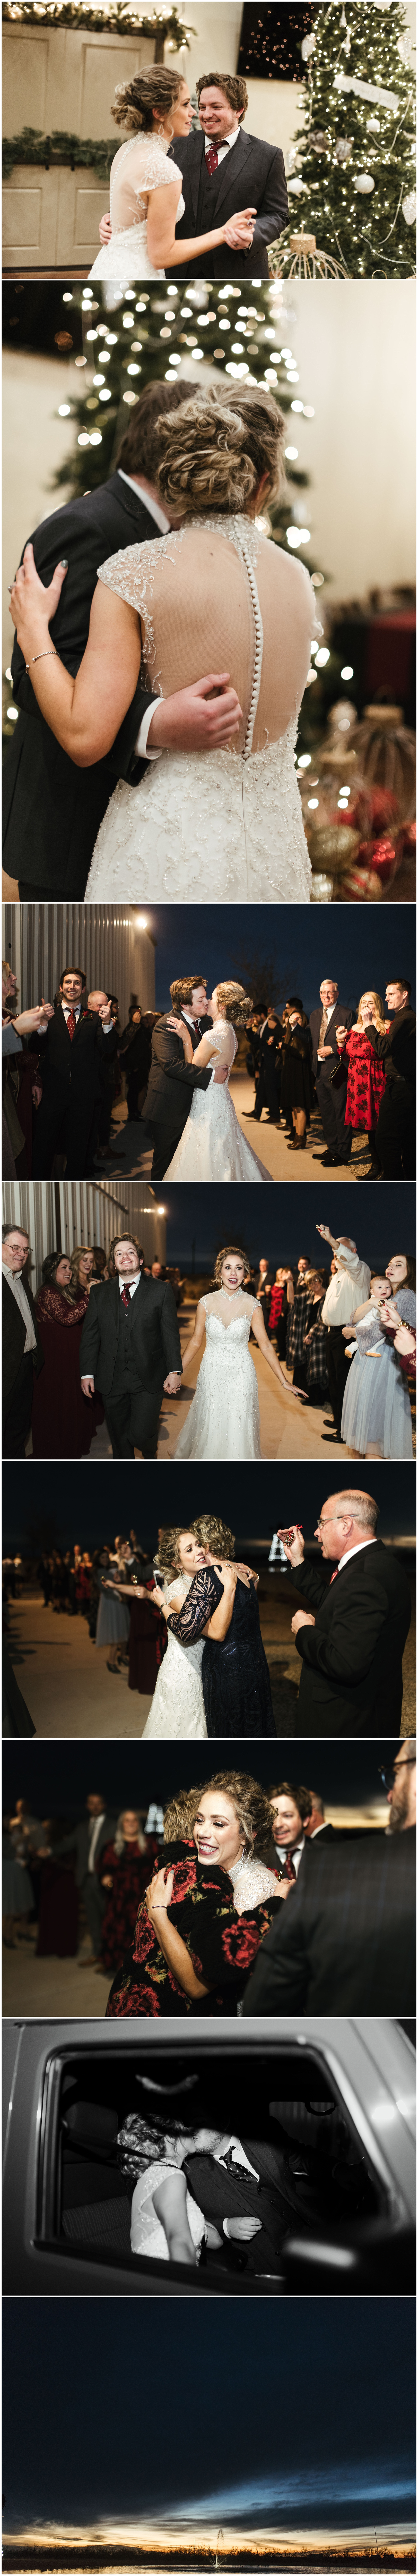  Twin Lakes Wedding and Event Center | Ropesville, TX | Lubbock Wedding | Fort Worth Wedding Photographer | www.jordanmitchellphotography.com 